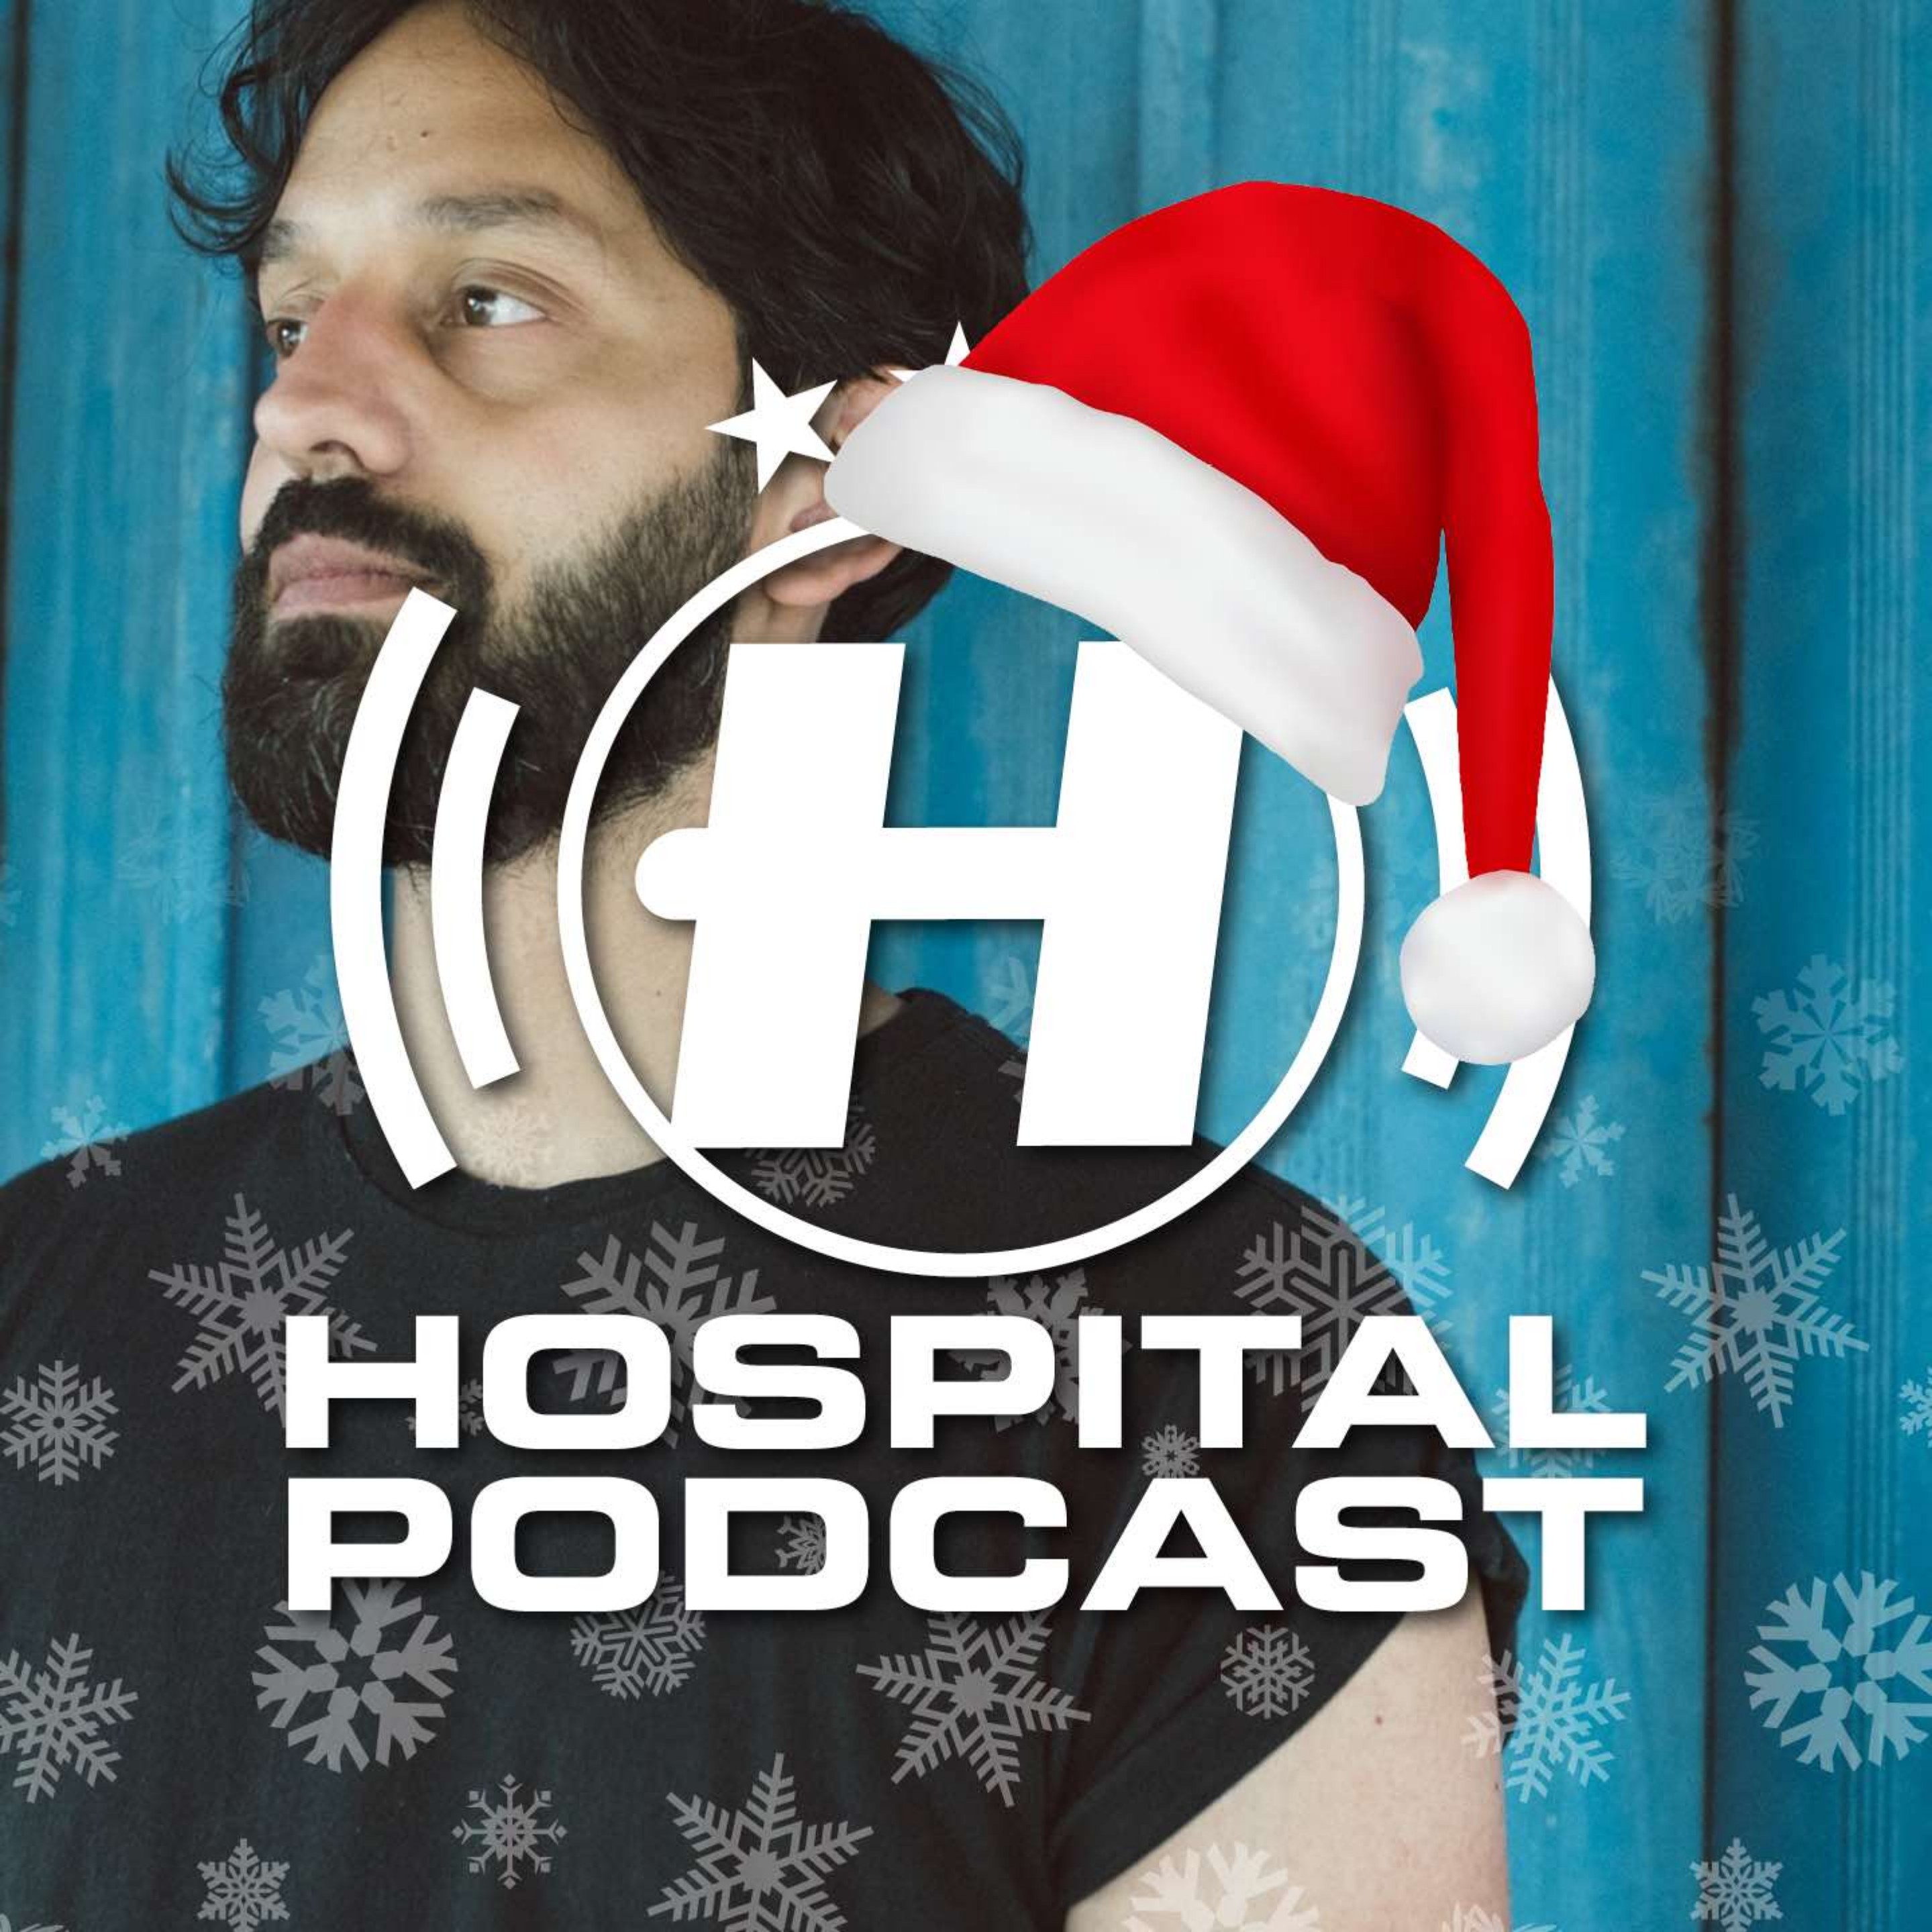 Hospital Podcast 454 with Mitekiss - Xmas Special Artwork